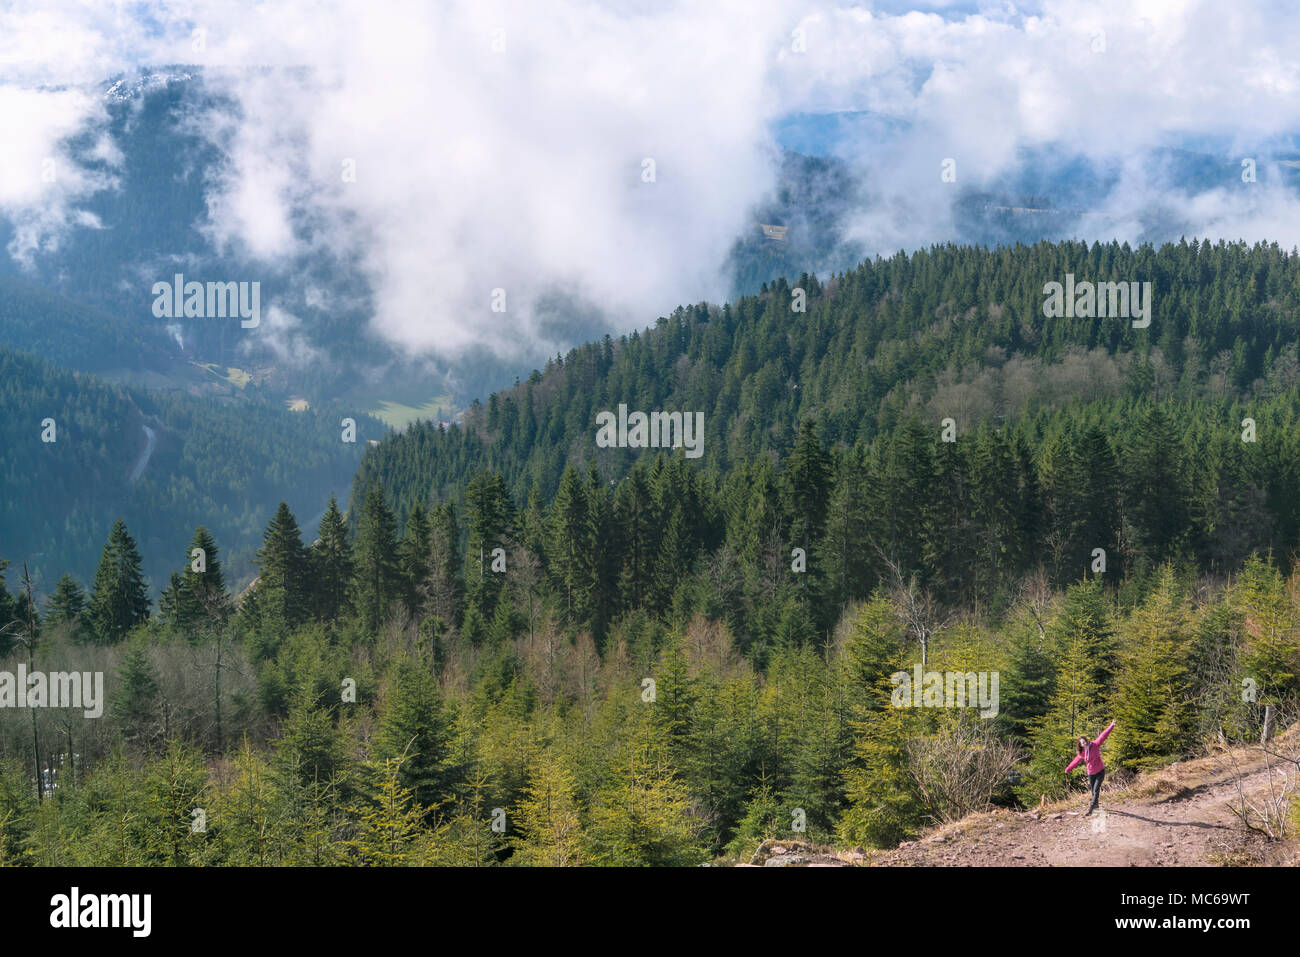 Landscape with the Hornisgrinde mountains, covered with green fir forest and a girl enjoying the view, in the Northern Black Forest of Germany. Stock Photo